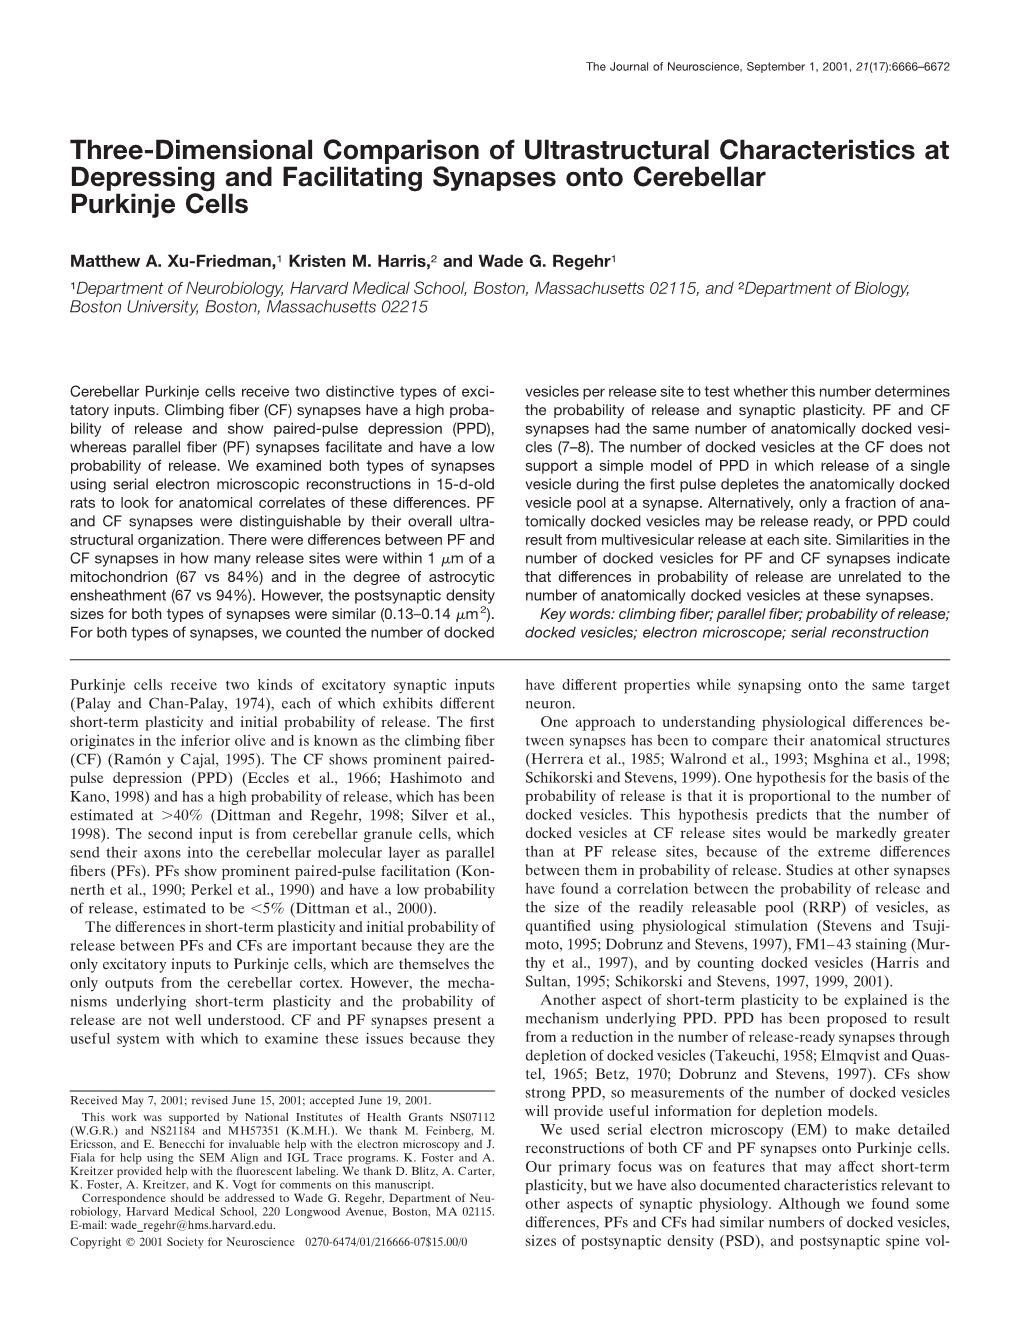 Three-Dimensional Comparison of Ultrastructural Characteristics at Depressing and Facilitating Synapses Onto Cerebellar Purkinje Cells